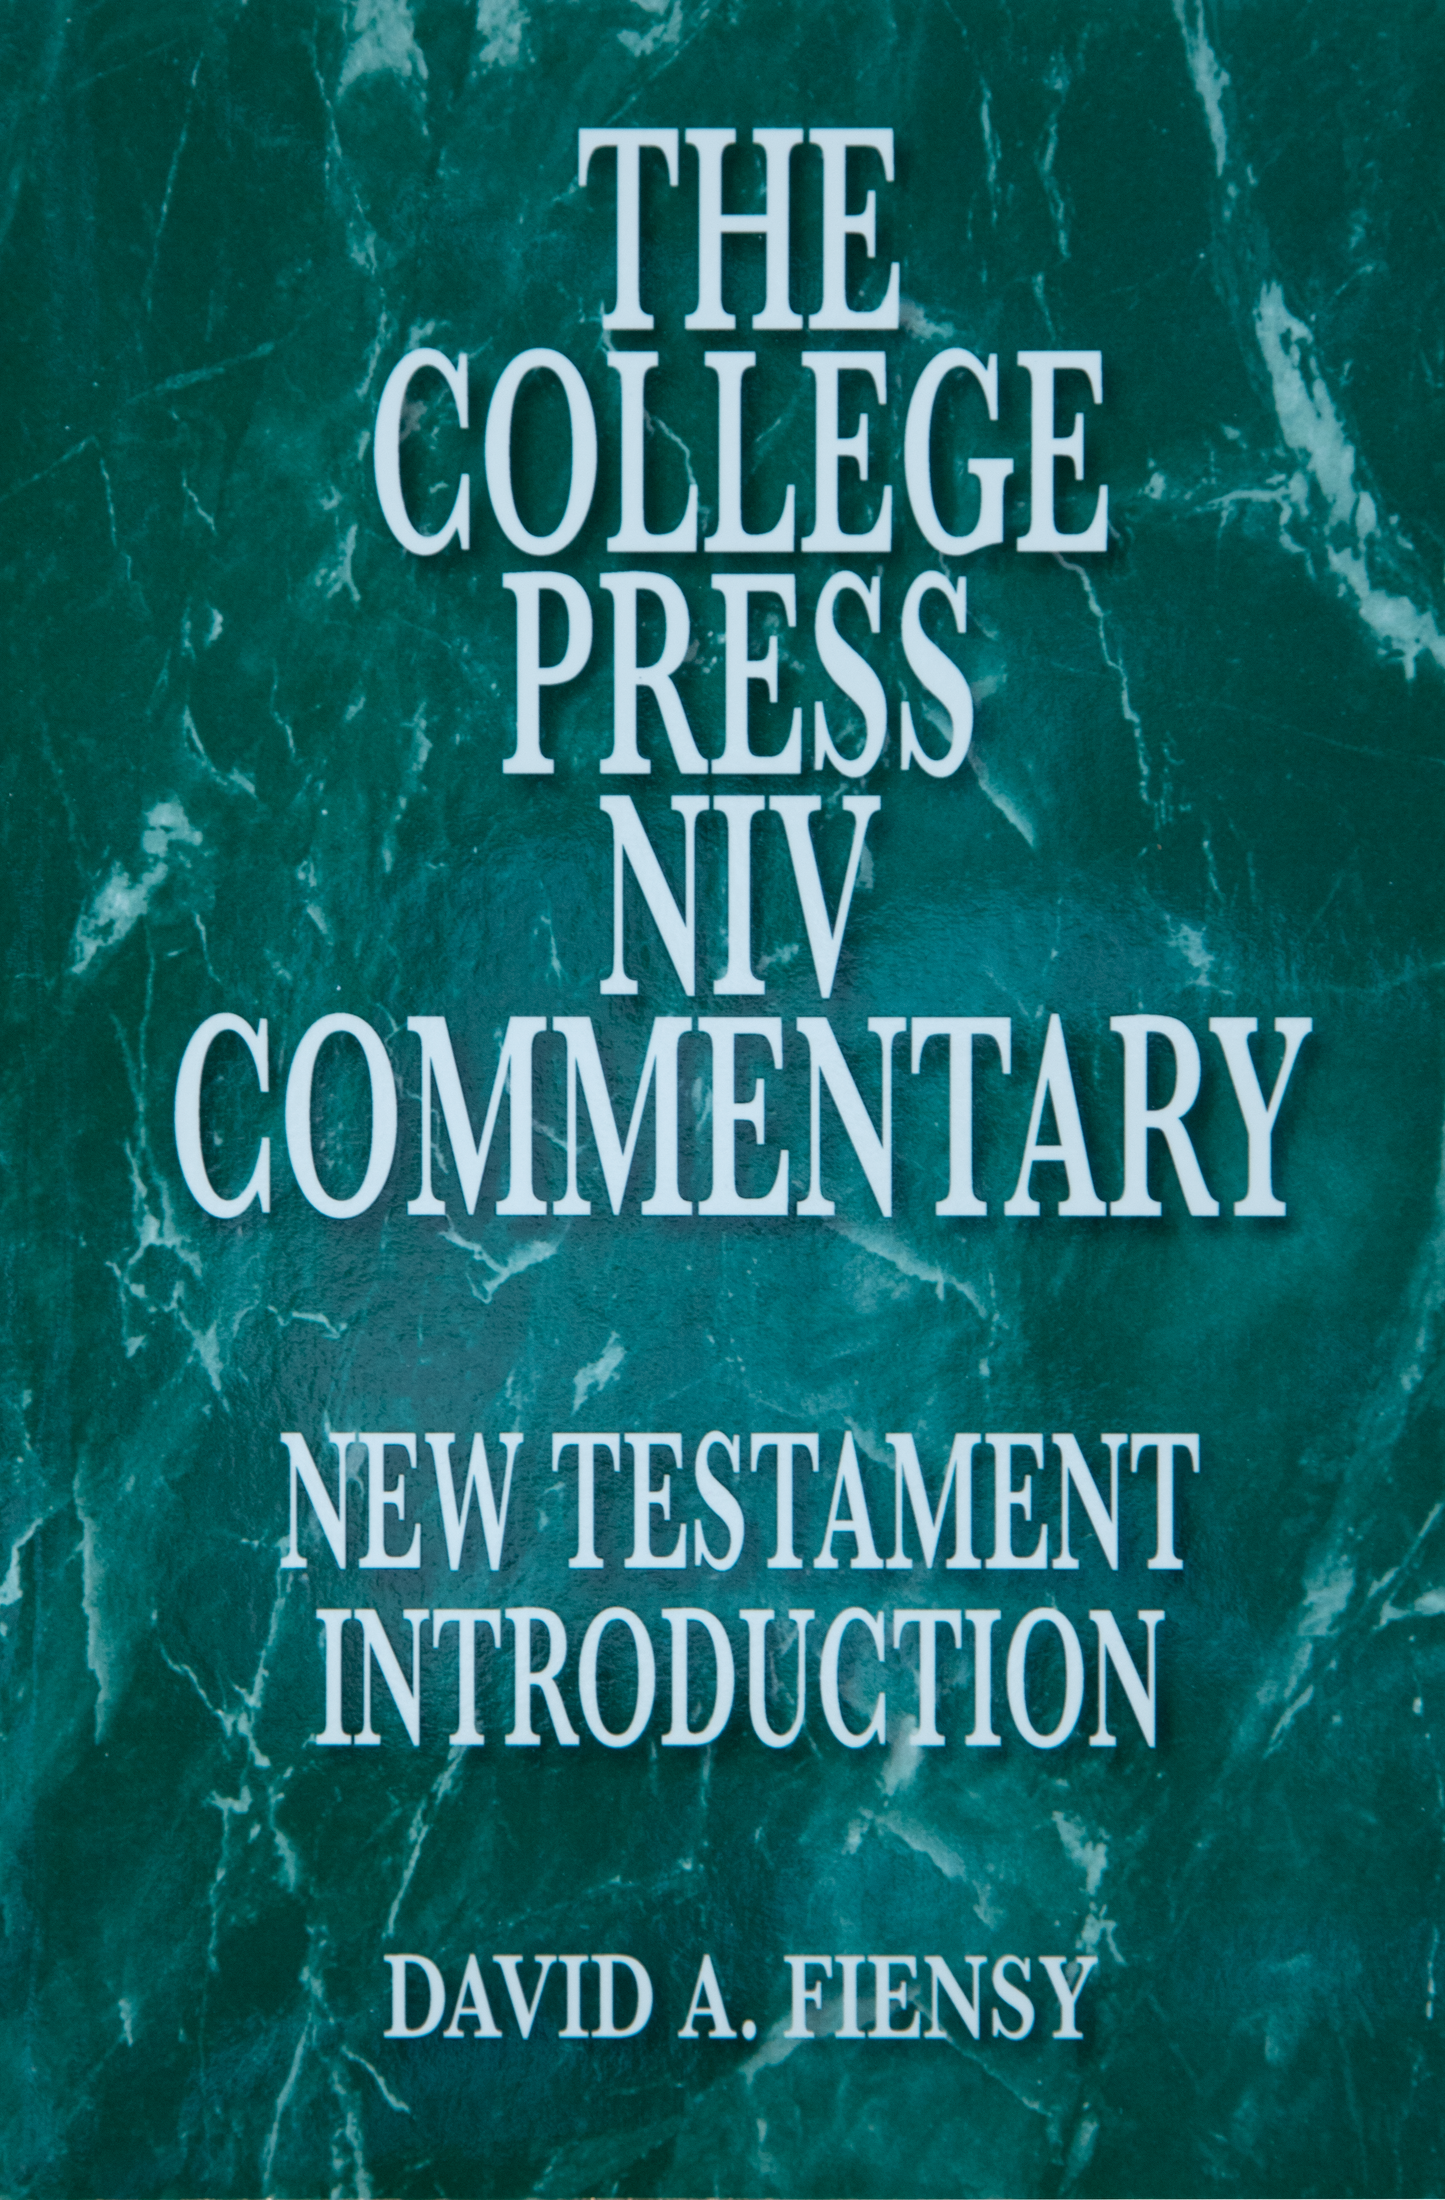 New Testament Introduction - NIV - Softcover